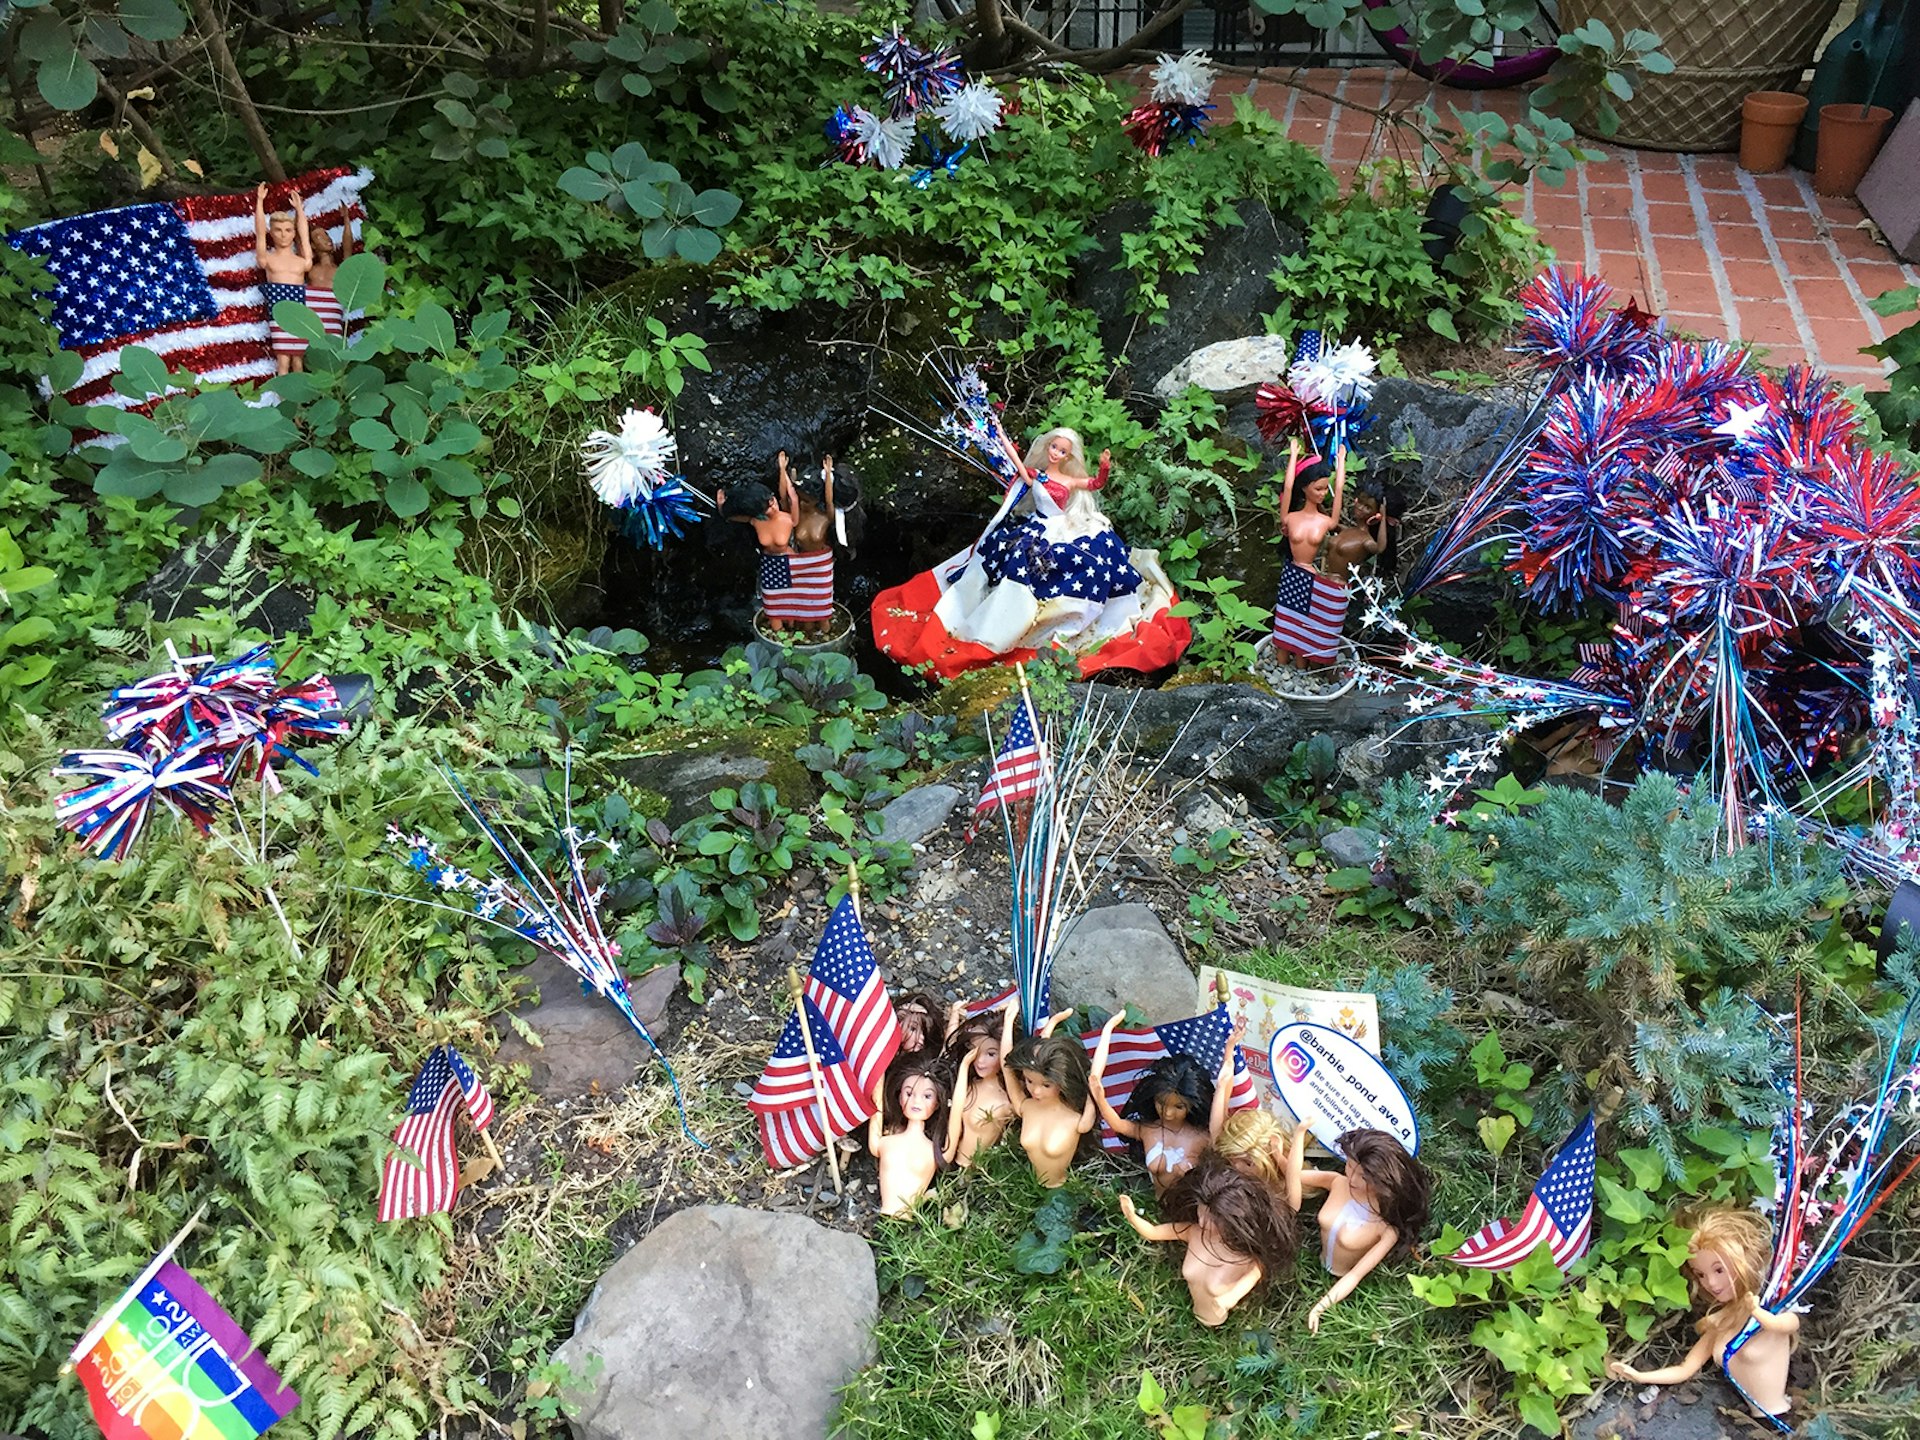 An assortment of Barbie dolls dressed for the Fourth of July holiday in red, white and blue, amid greenery around a small pond in a front yard in Washington DC © Barbara Noe Kennedy / Lonely Planet